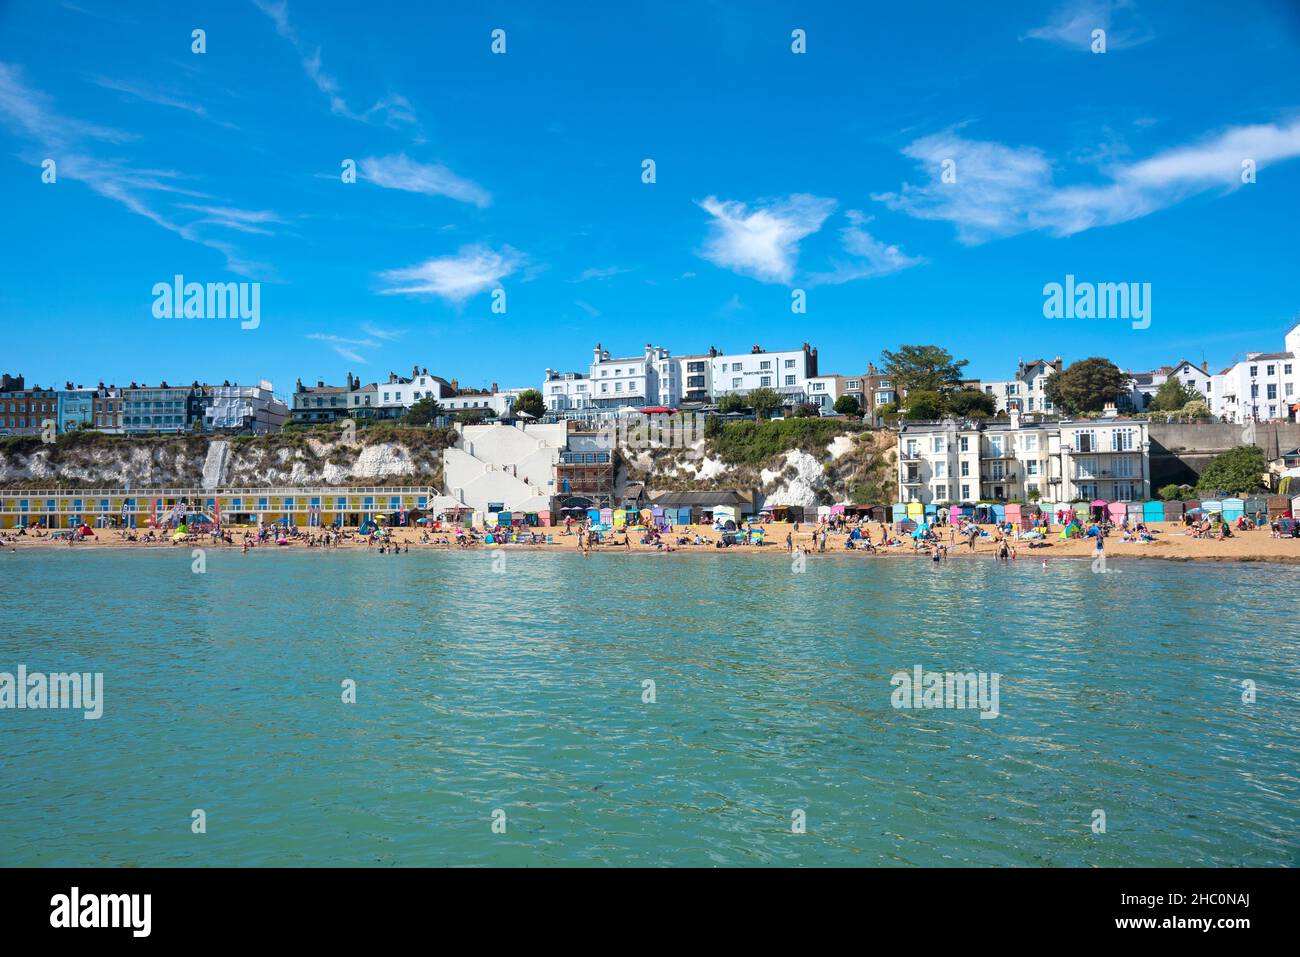 People sunbathing and playing on beach in Broadstairs in Kent Stock Photo